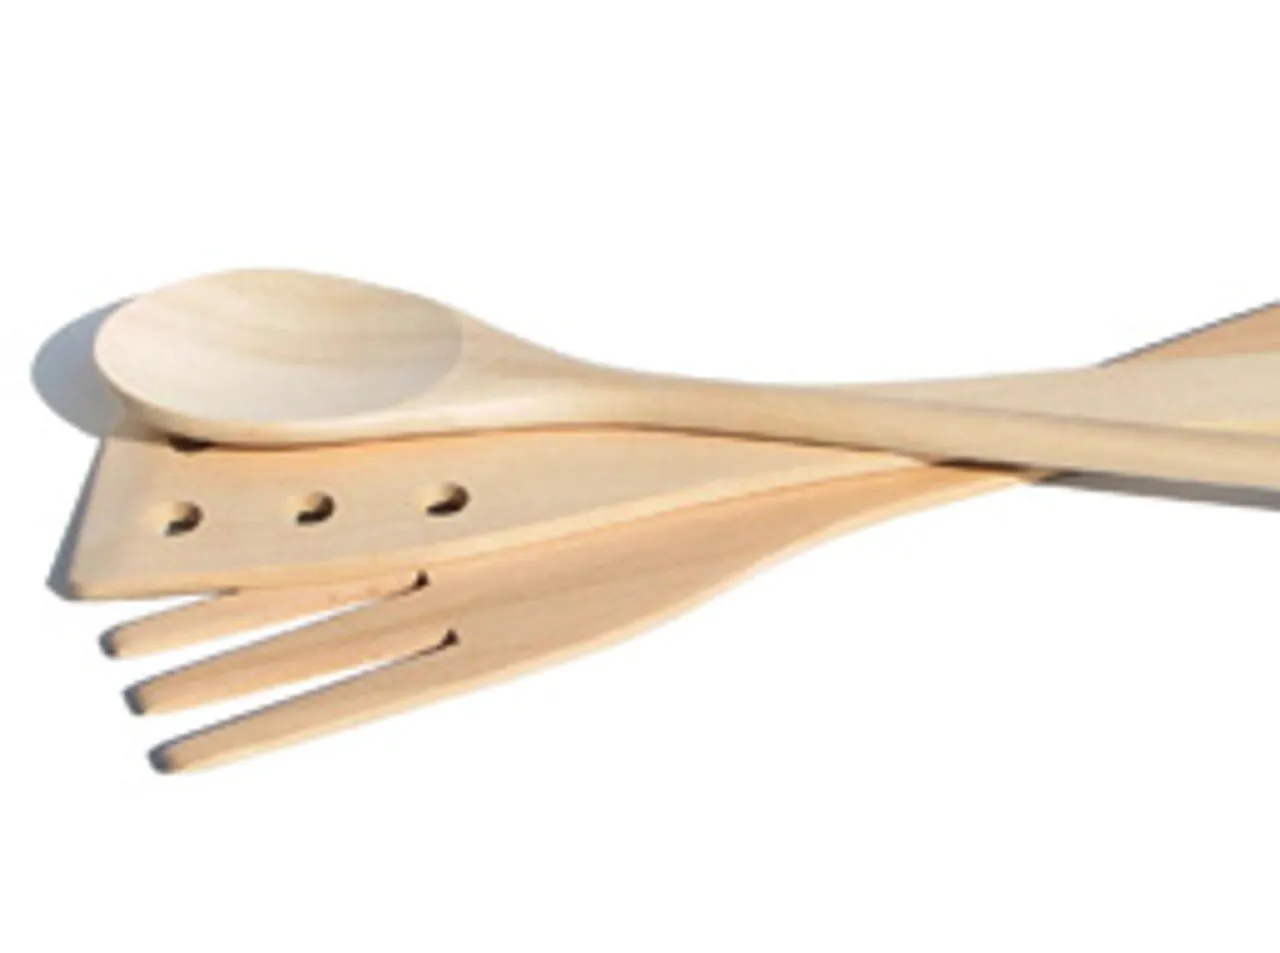 Top 7 reasons whywooden spatulas work